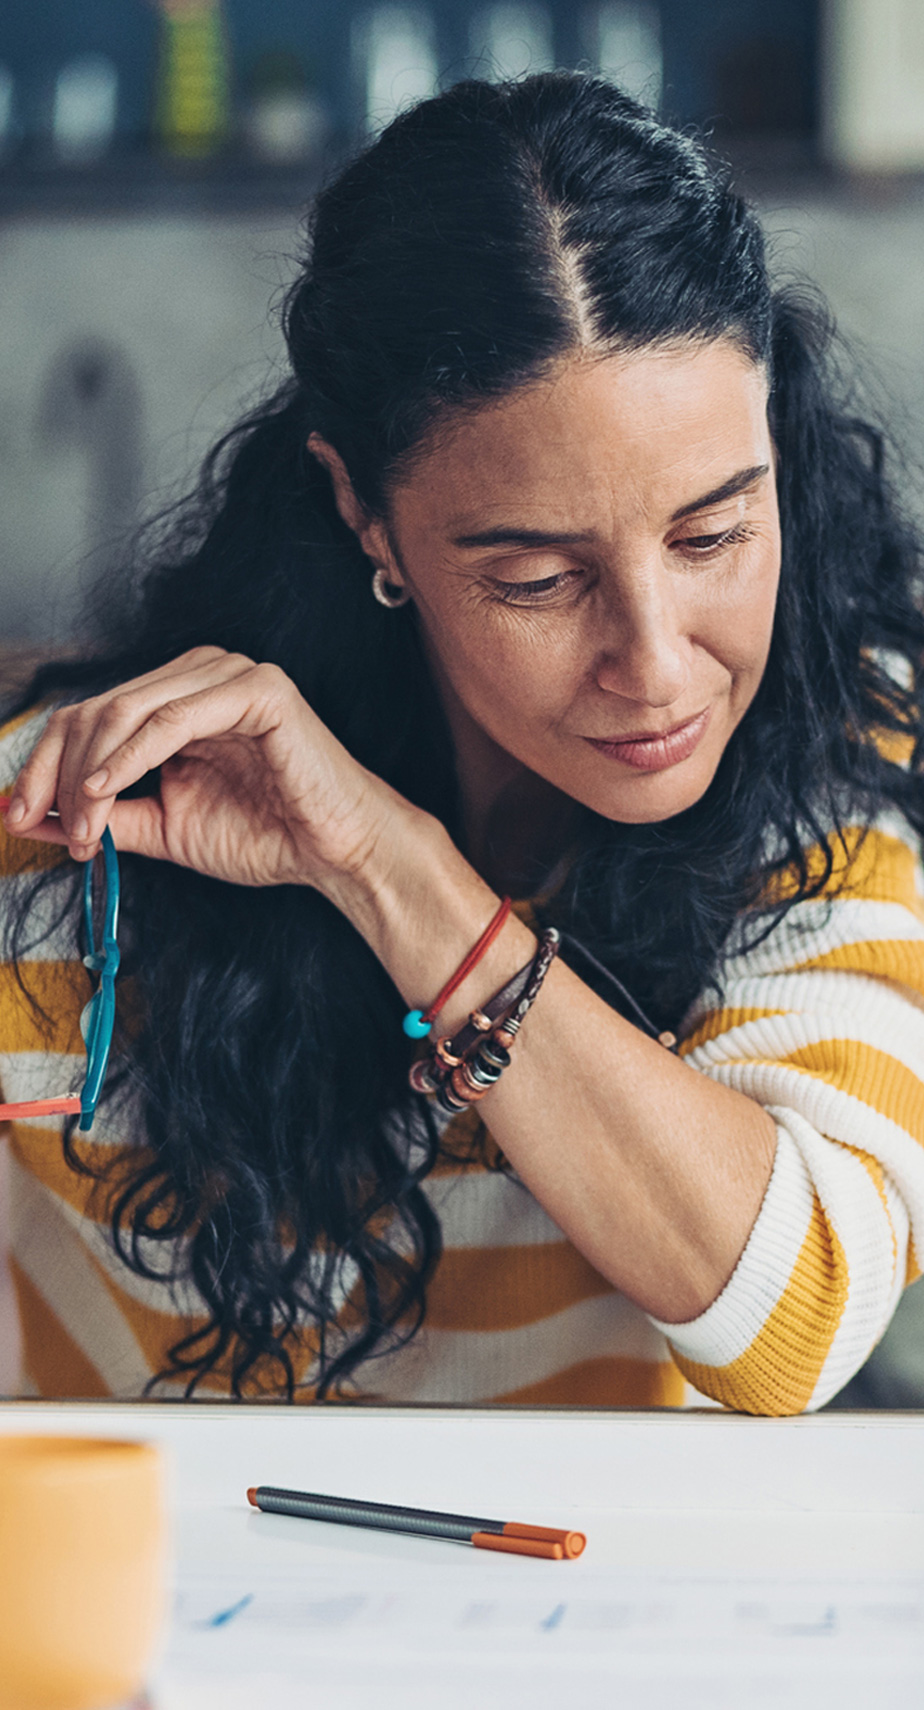 dark haired woman looking down with bracelets